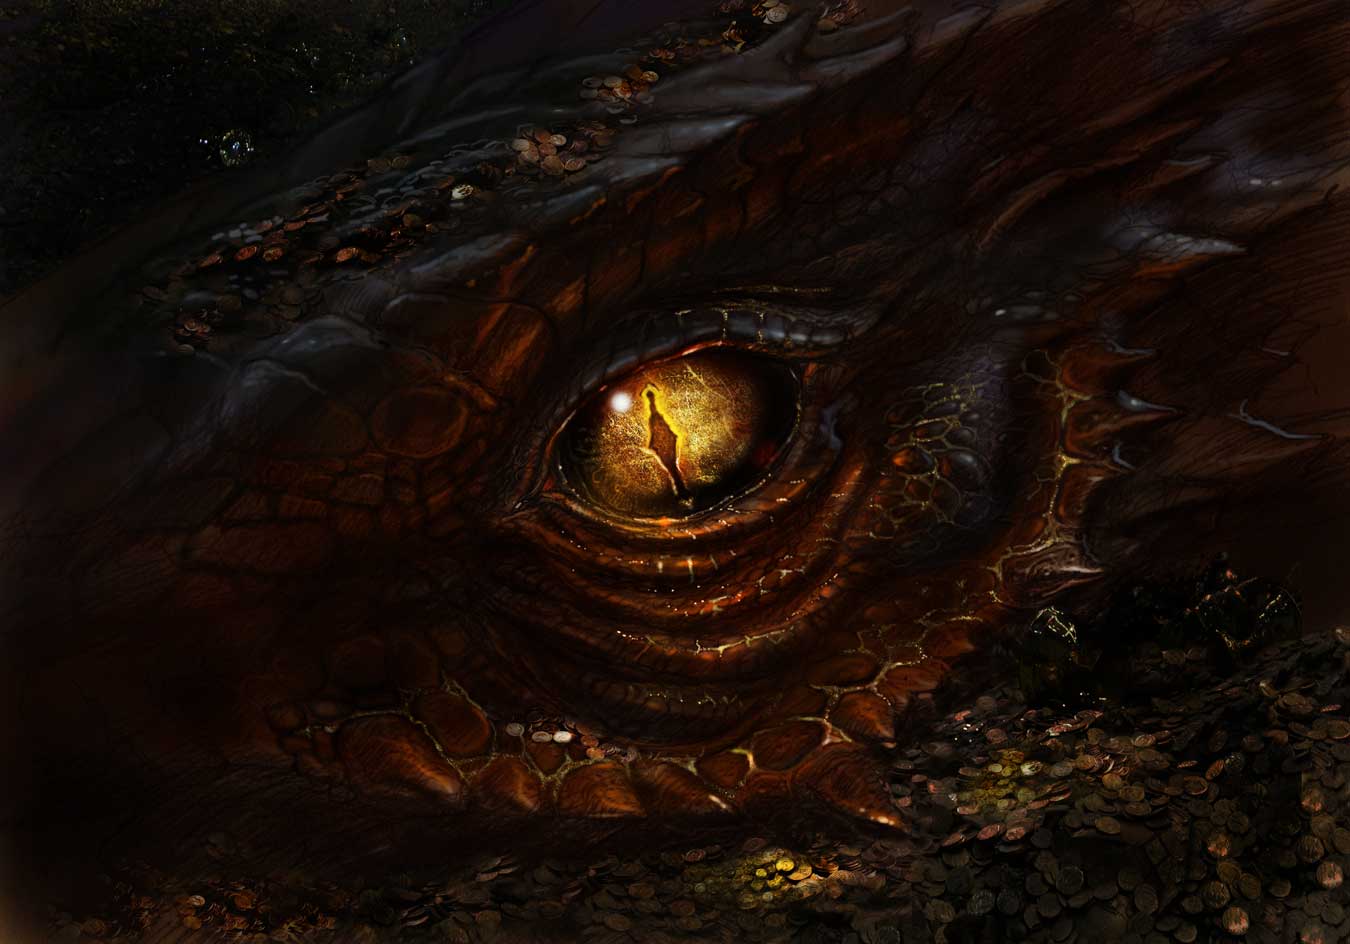 This site have 9 coloring page pictures about Hobbit Dragon Smaug Eye inclu...